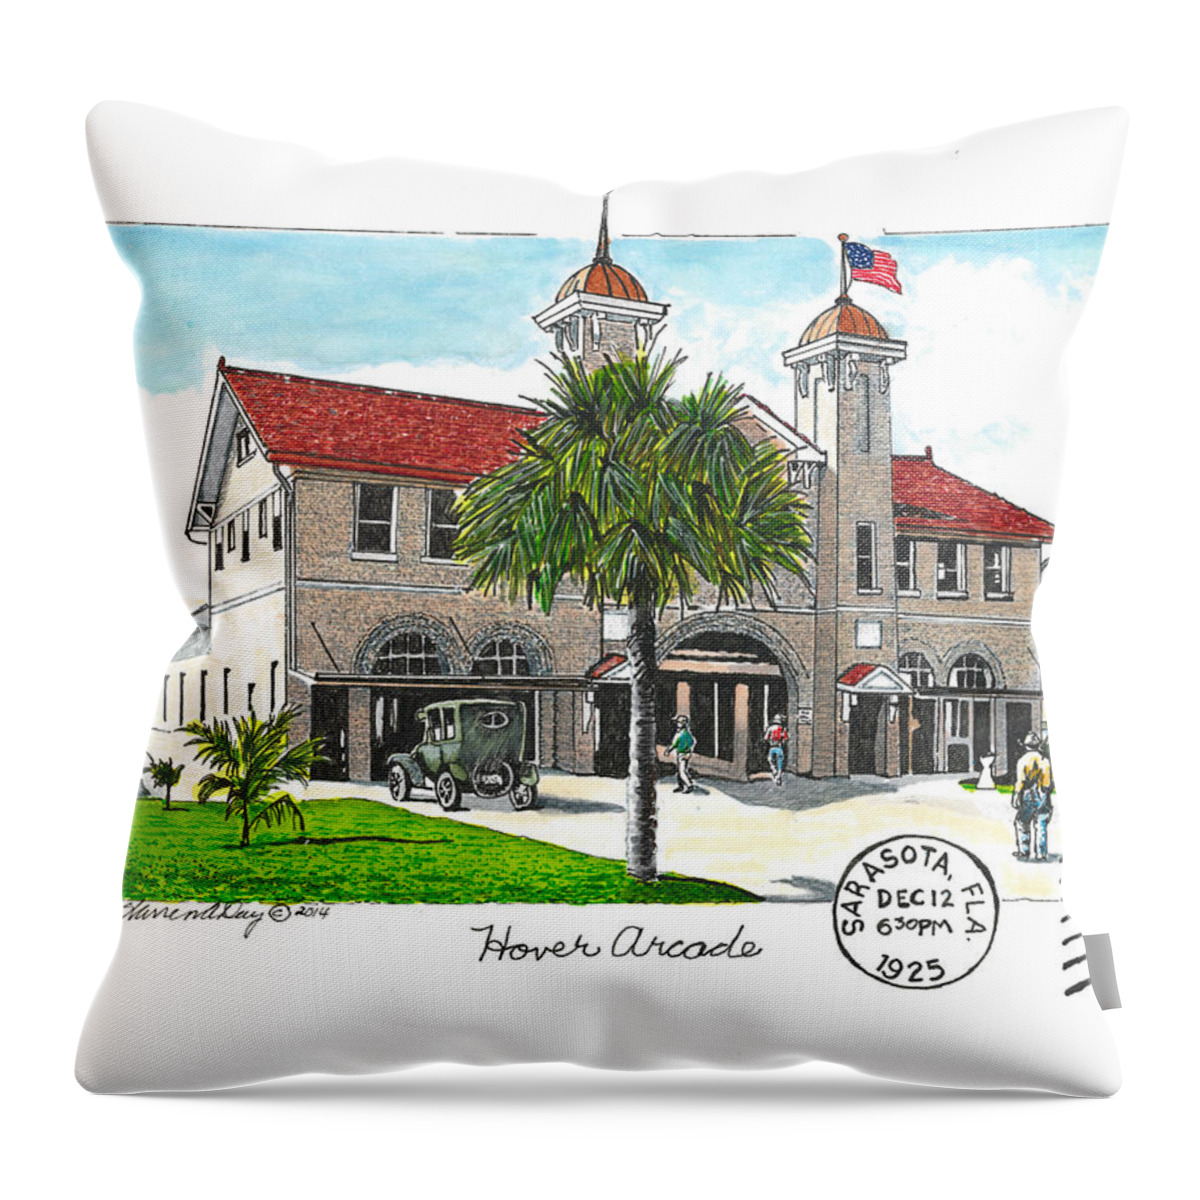 Warren Day Throw Pillow featuring the painting Hover Arcade by Warren Day